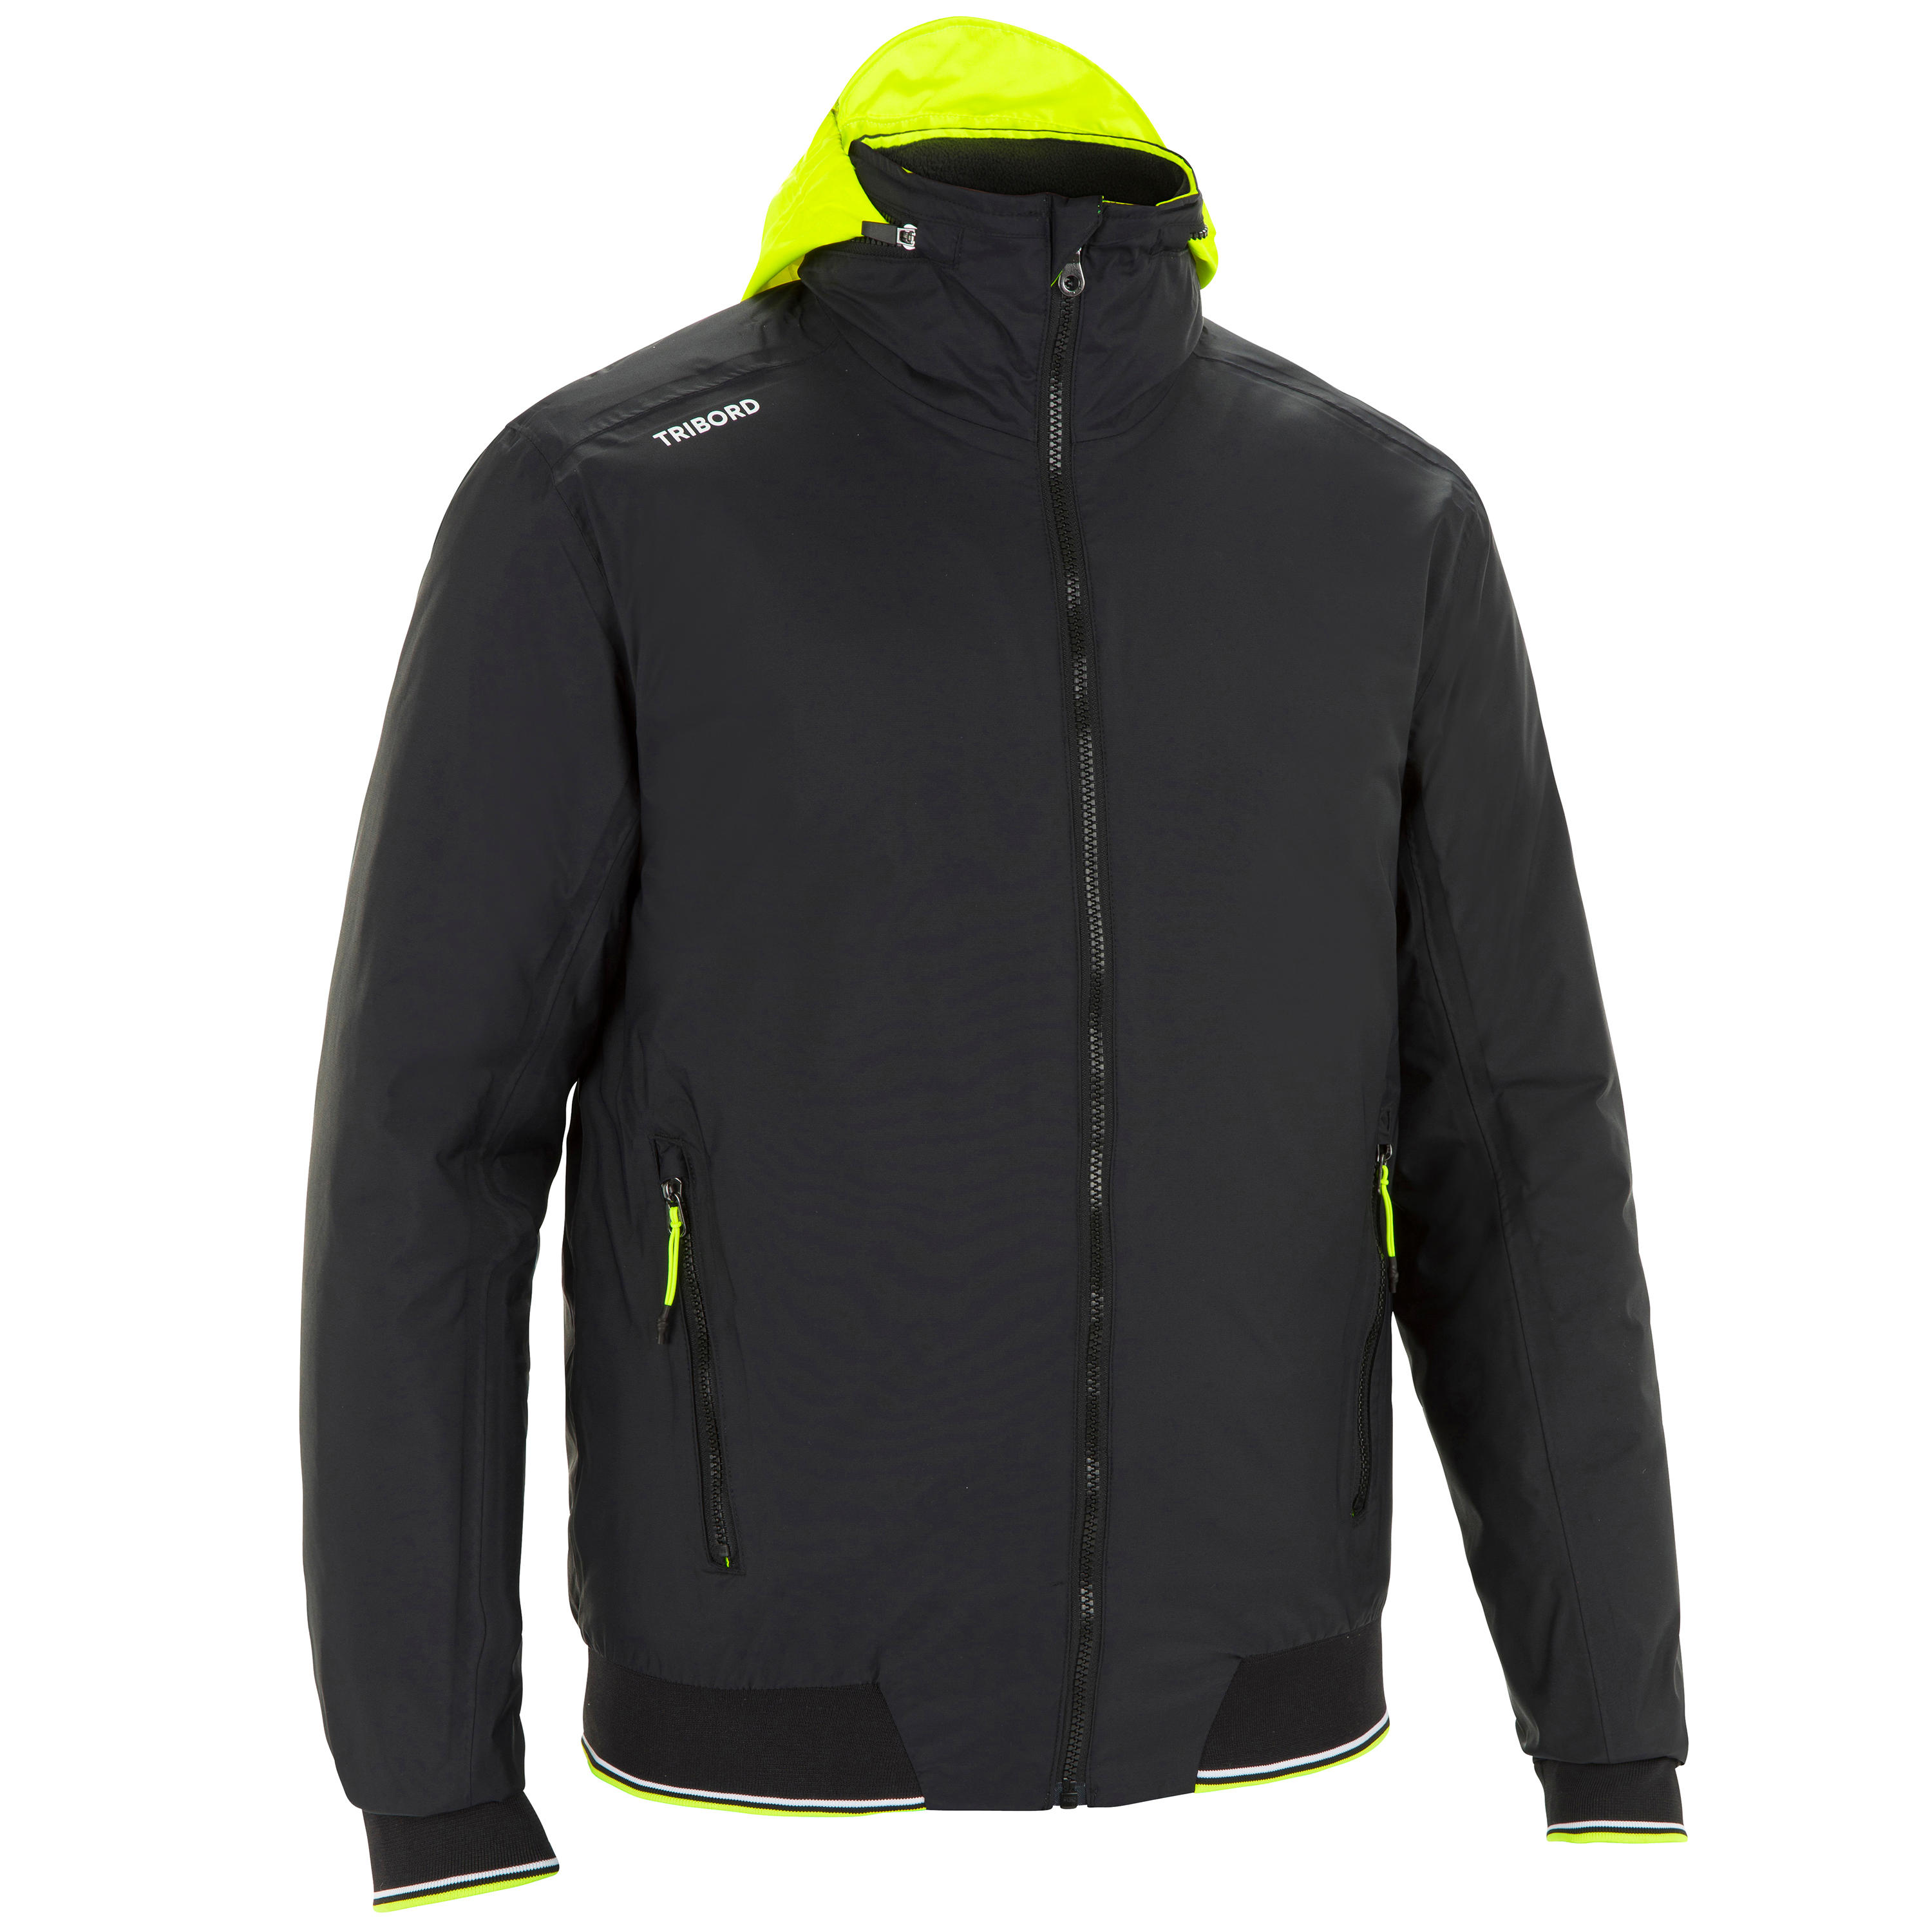 Decathlon Quechua MH500 Review - Bargain 3-Layer Budget Waterproof Jacket??  - YouTube